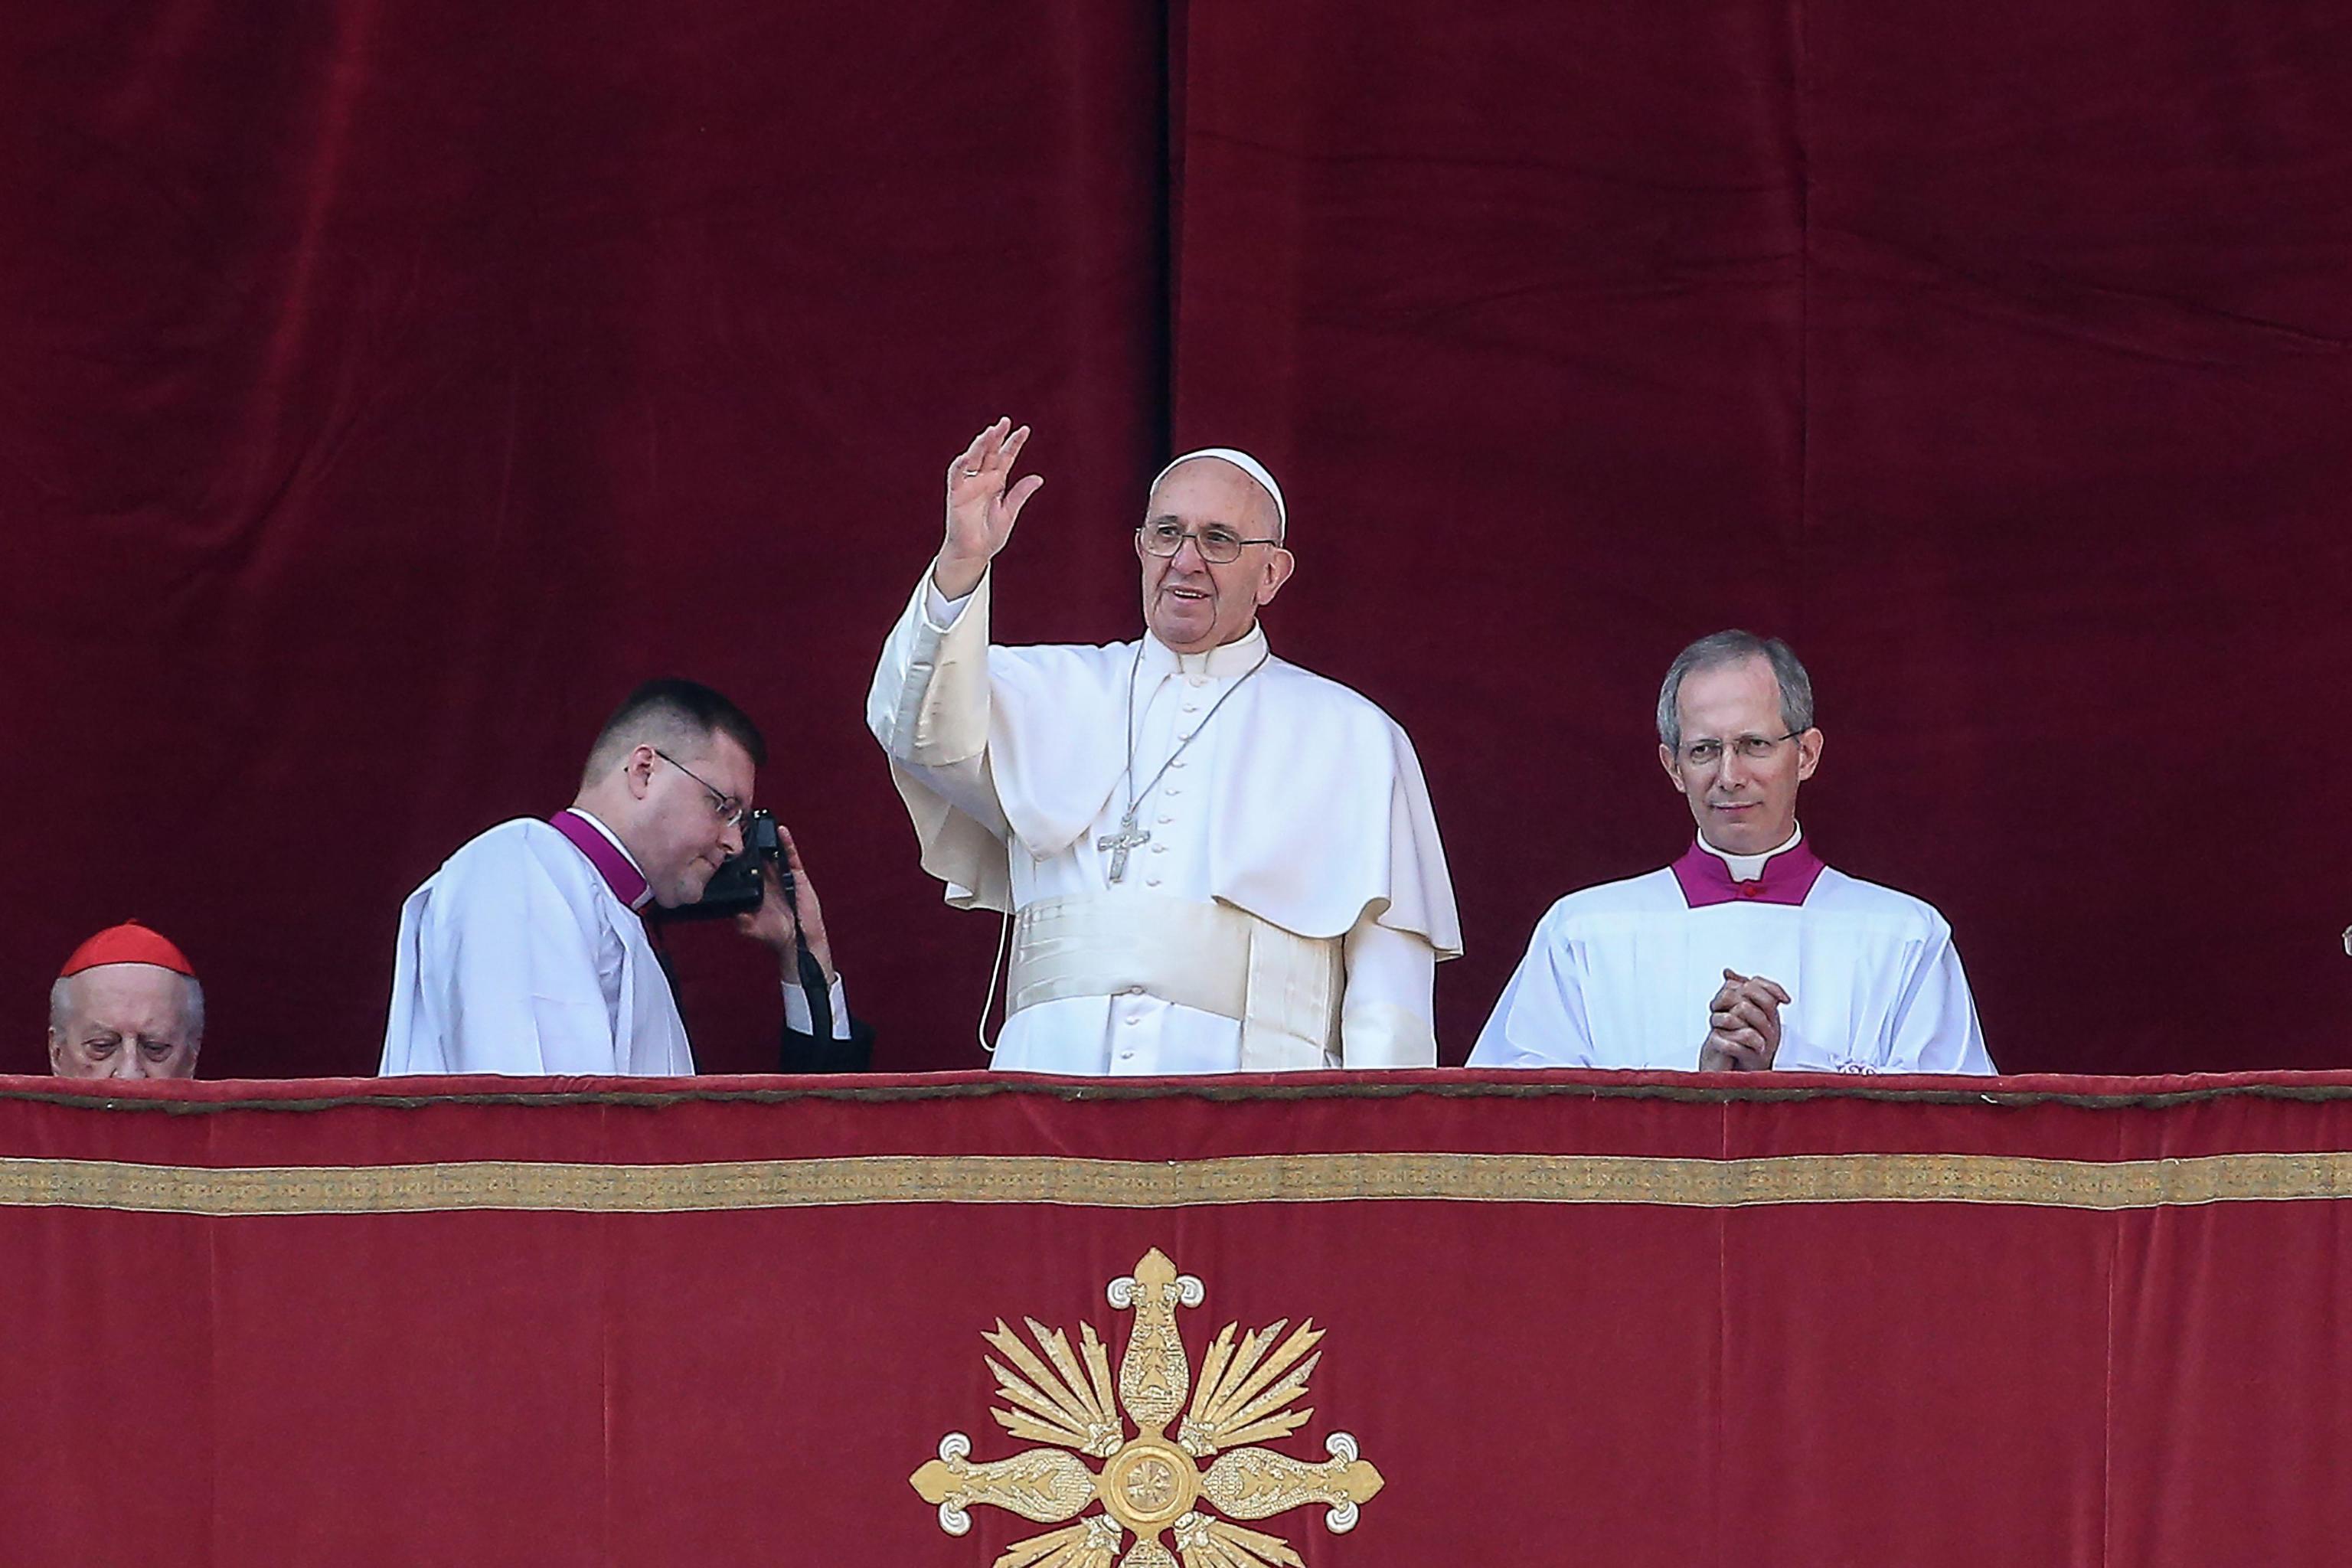 Pope Francis waves to the faithful as he delivers the traditional Urbi et Orbi Christmas Day message from the central balcony of St. Peters Basilica in Vatican City